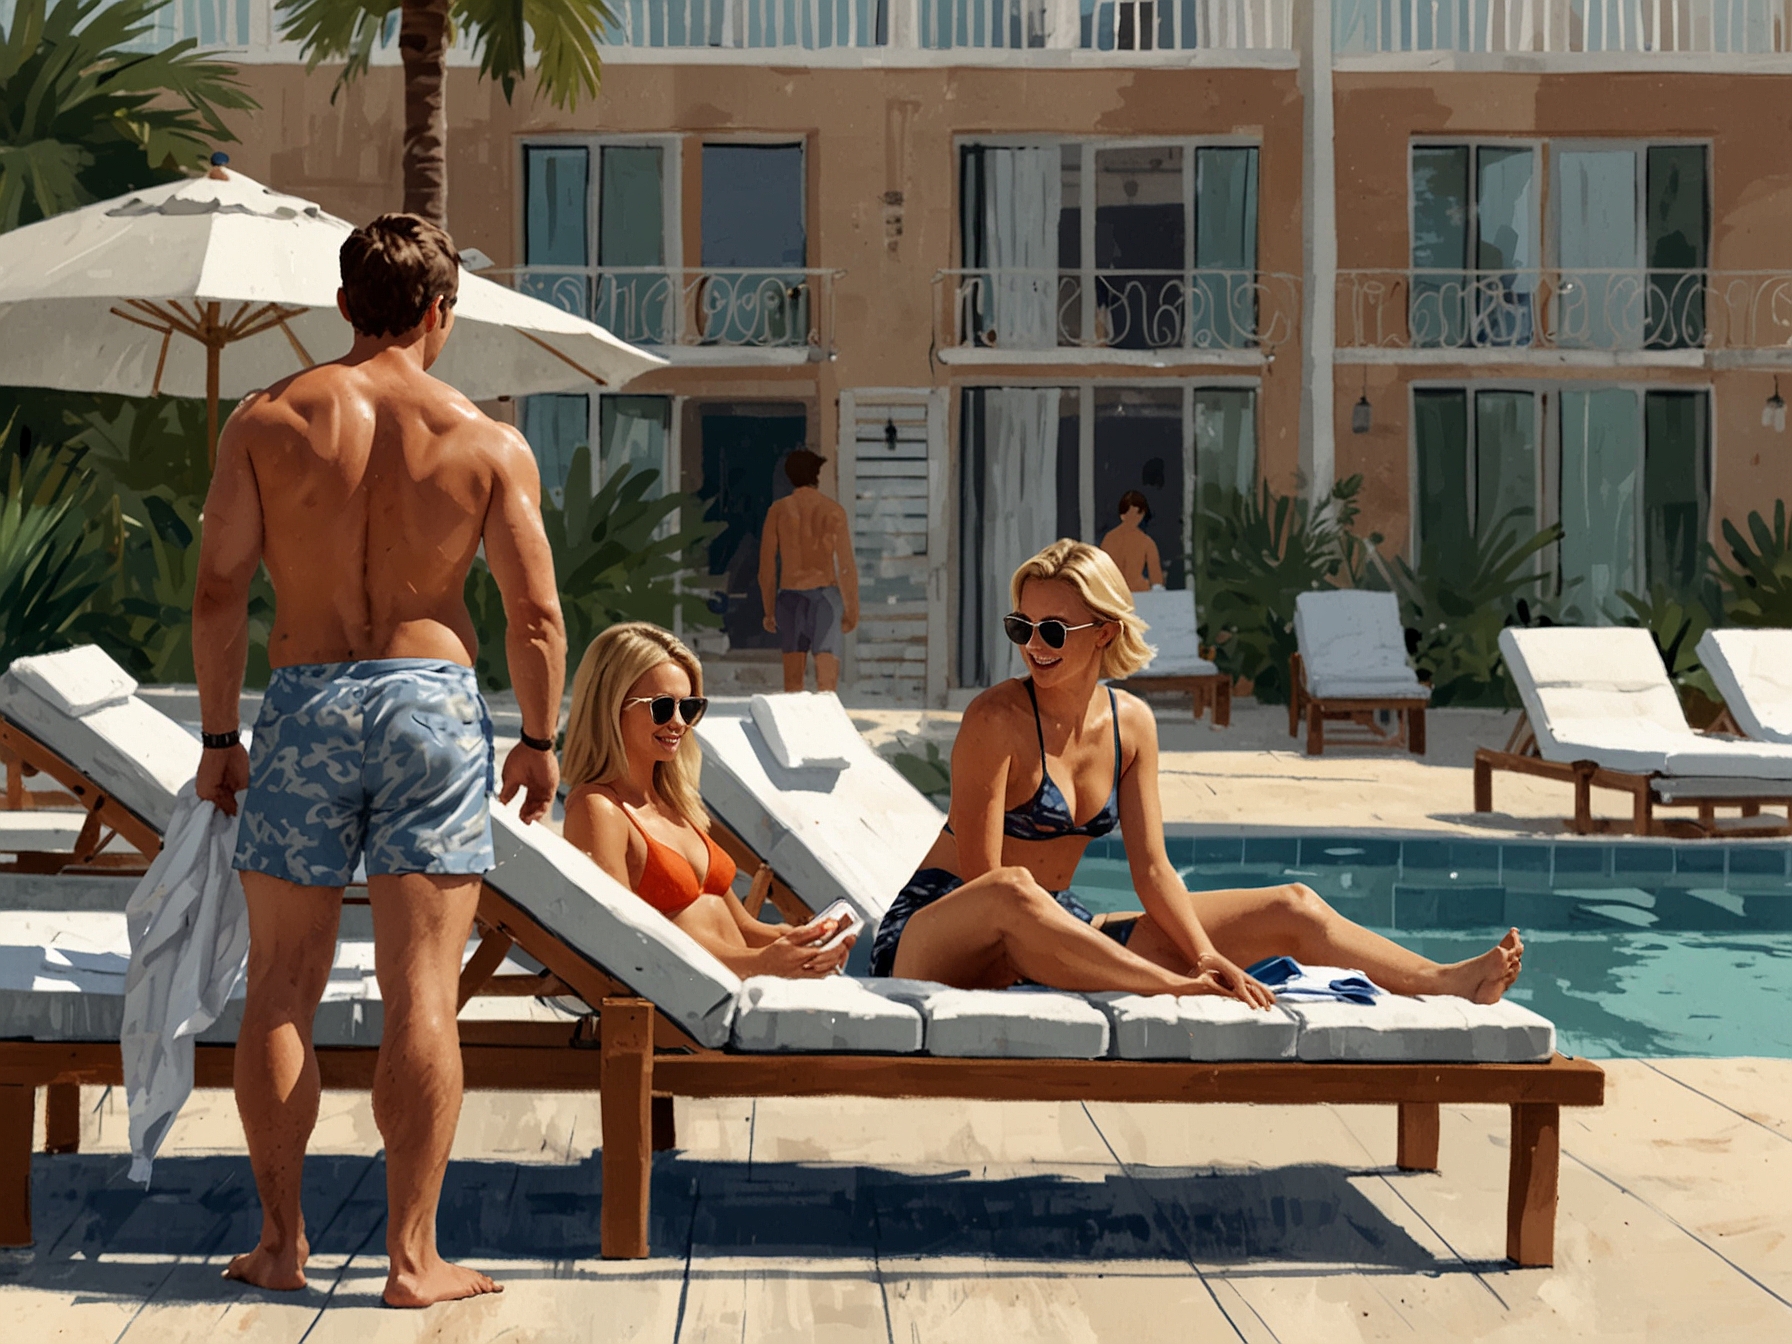 Early morning scene at a resort poolside, showing British tourists placing towels on sun loungers to reserve their spots, capturing the dedication and strategy involved in securing prime holiday positions.